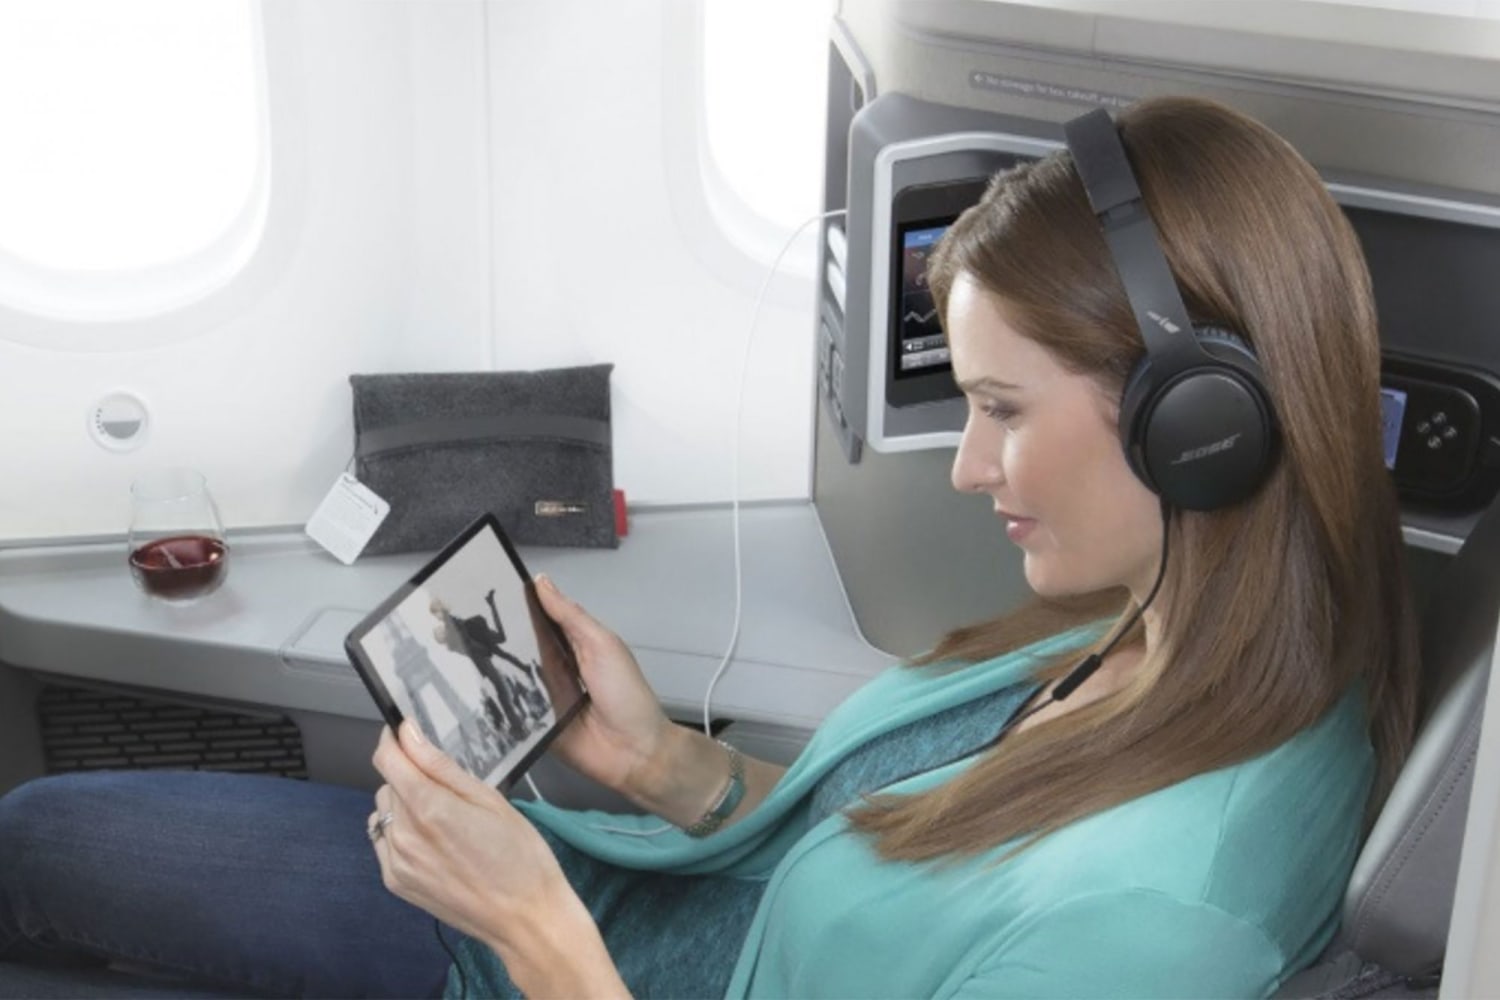 American Airlines Adds Wi-Fi to Over 700 Aircraft